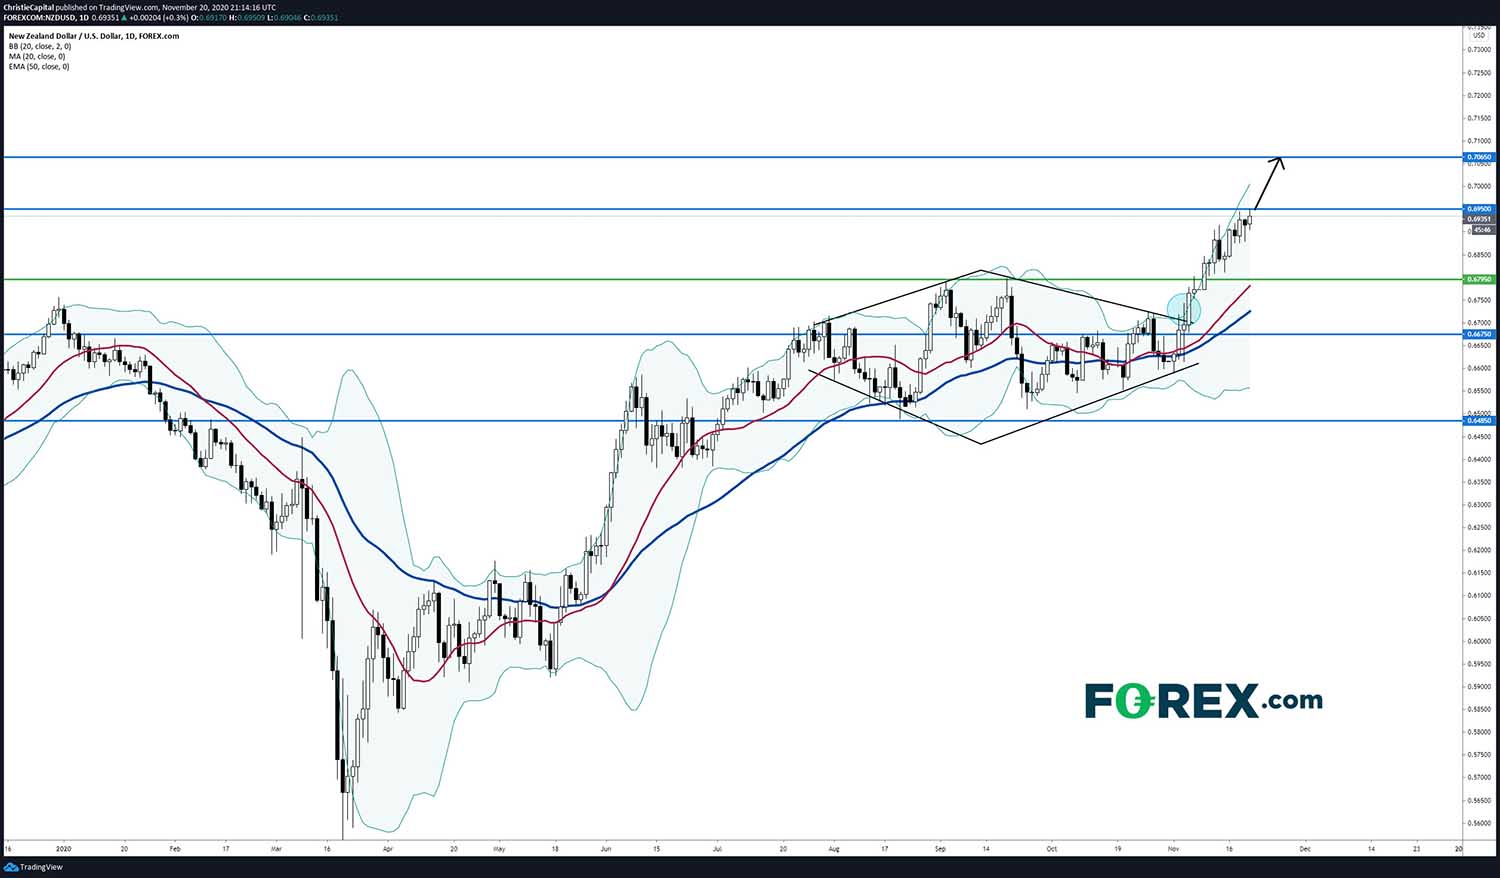 Market chart demonstrating NZD vs USD Continues To Show Bullish Momentum by FOREX.com